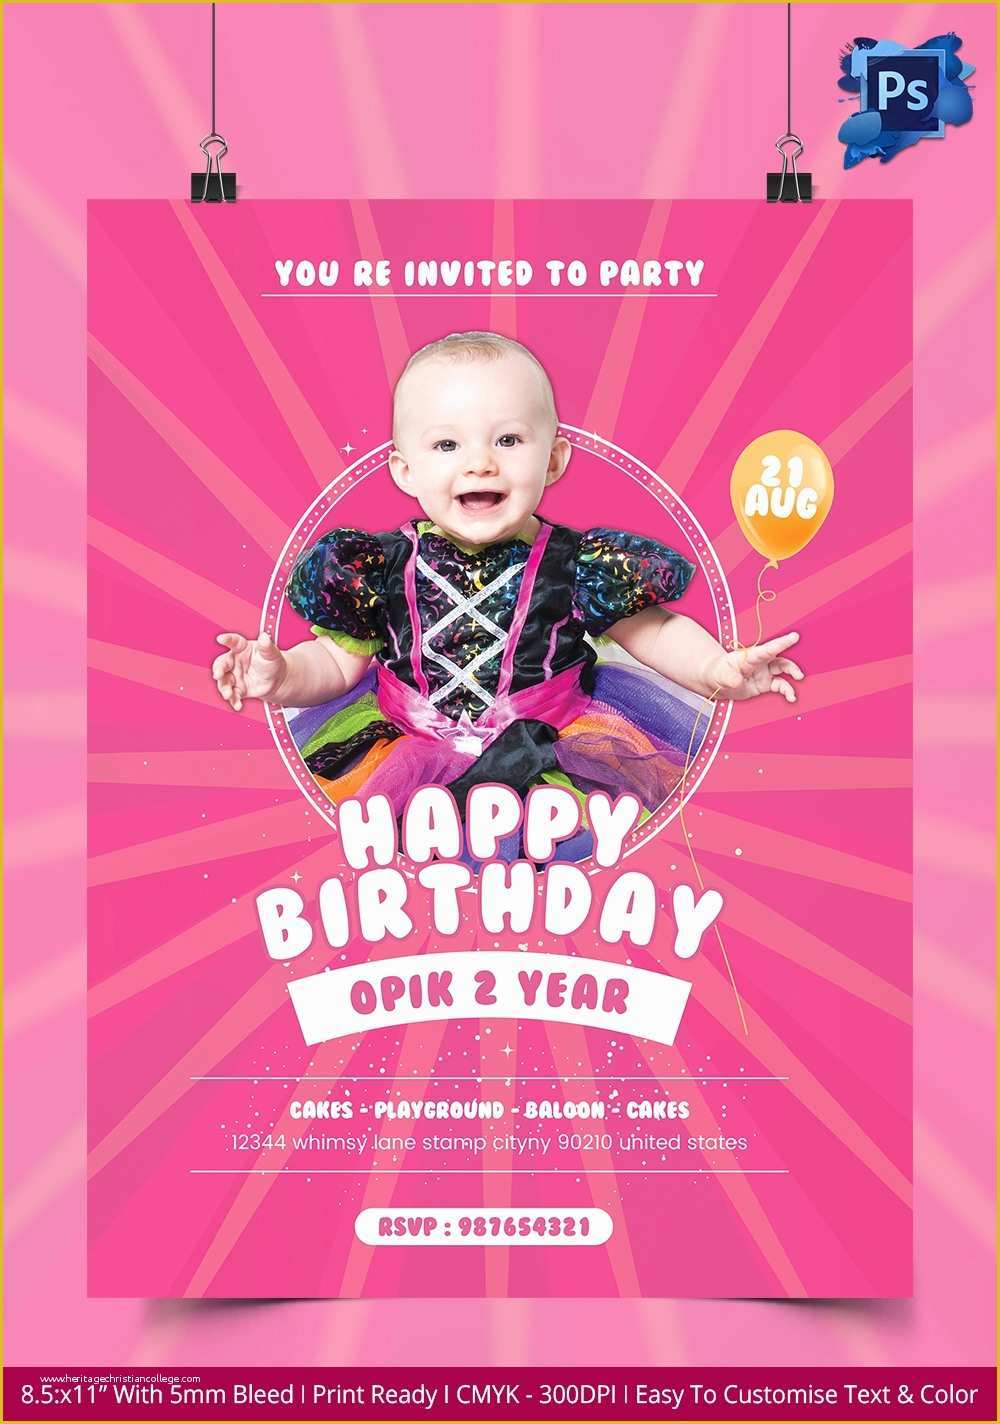 Birthday Party Flyer Templates Free Of Birthday Flyer Template – 37 Free Psd Ai Vector Eps